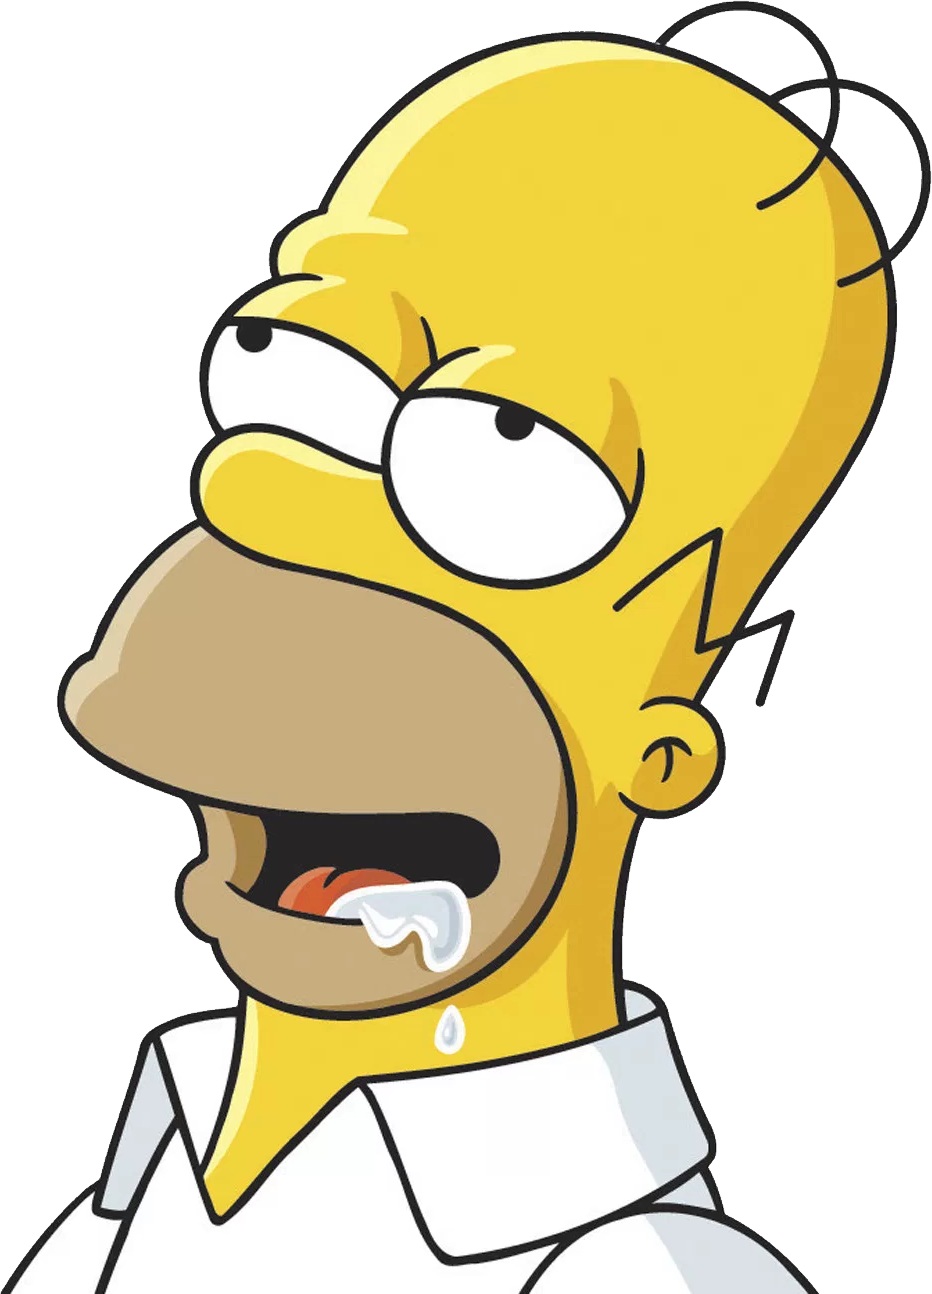 Homer Simpson Bart Simpson Lisa Simpson Marge Simpson Peter Griffin   Simpsons 932*1294 Transprent Png Free Download   Art, Beak, Yellow. - Marge Simpson, Transparent background PNG HD thumbnail